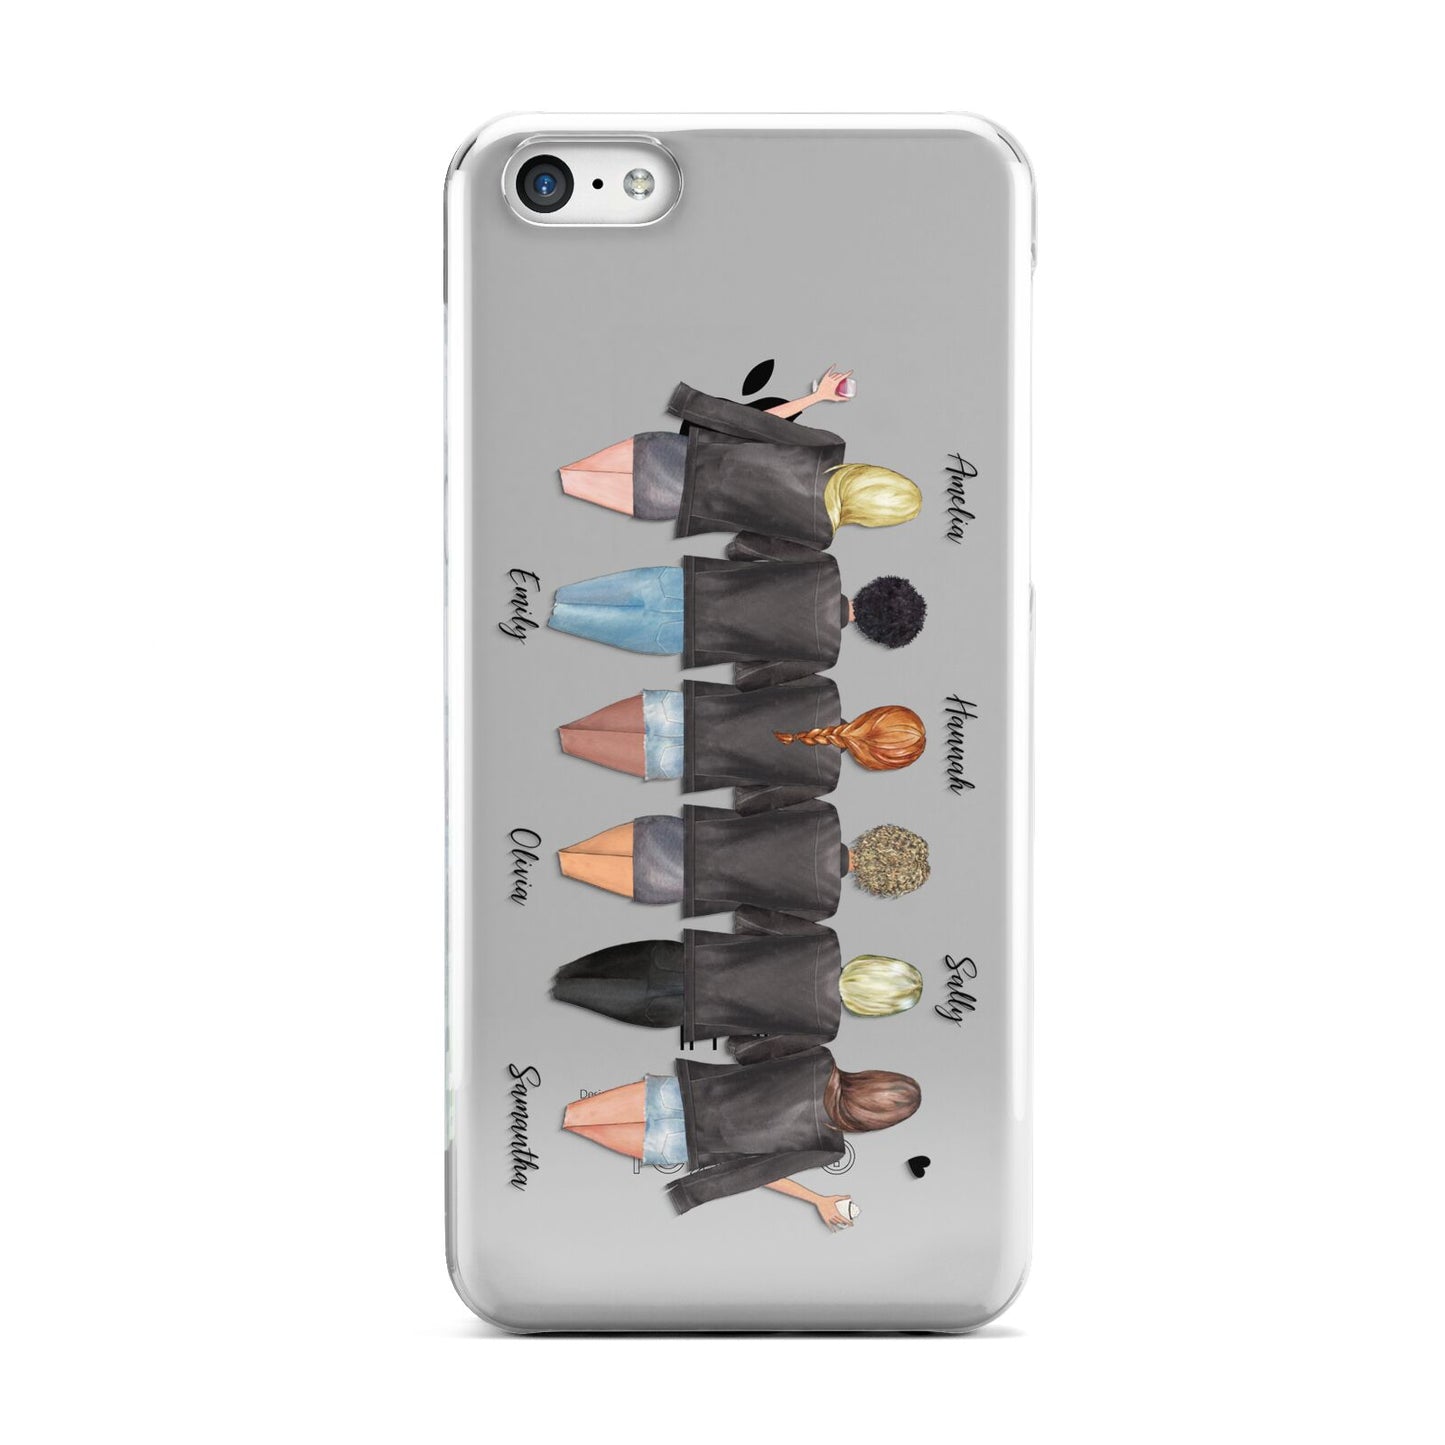 6 Best Friends with Names Apple iPhone 5c Case